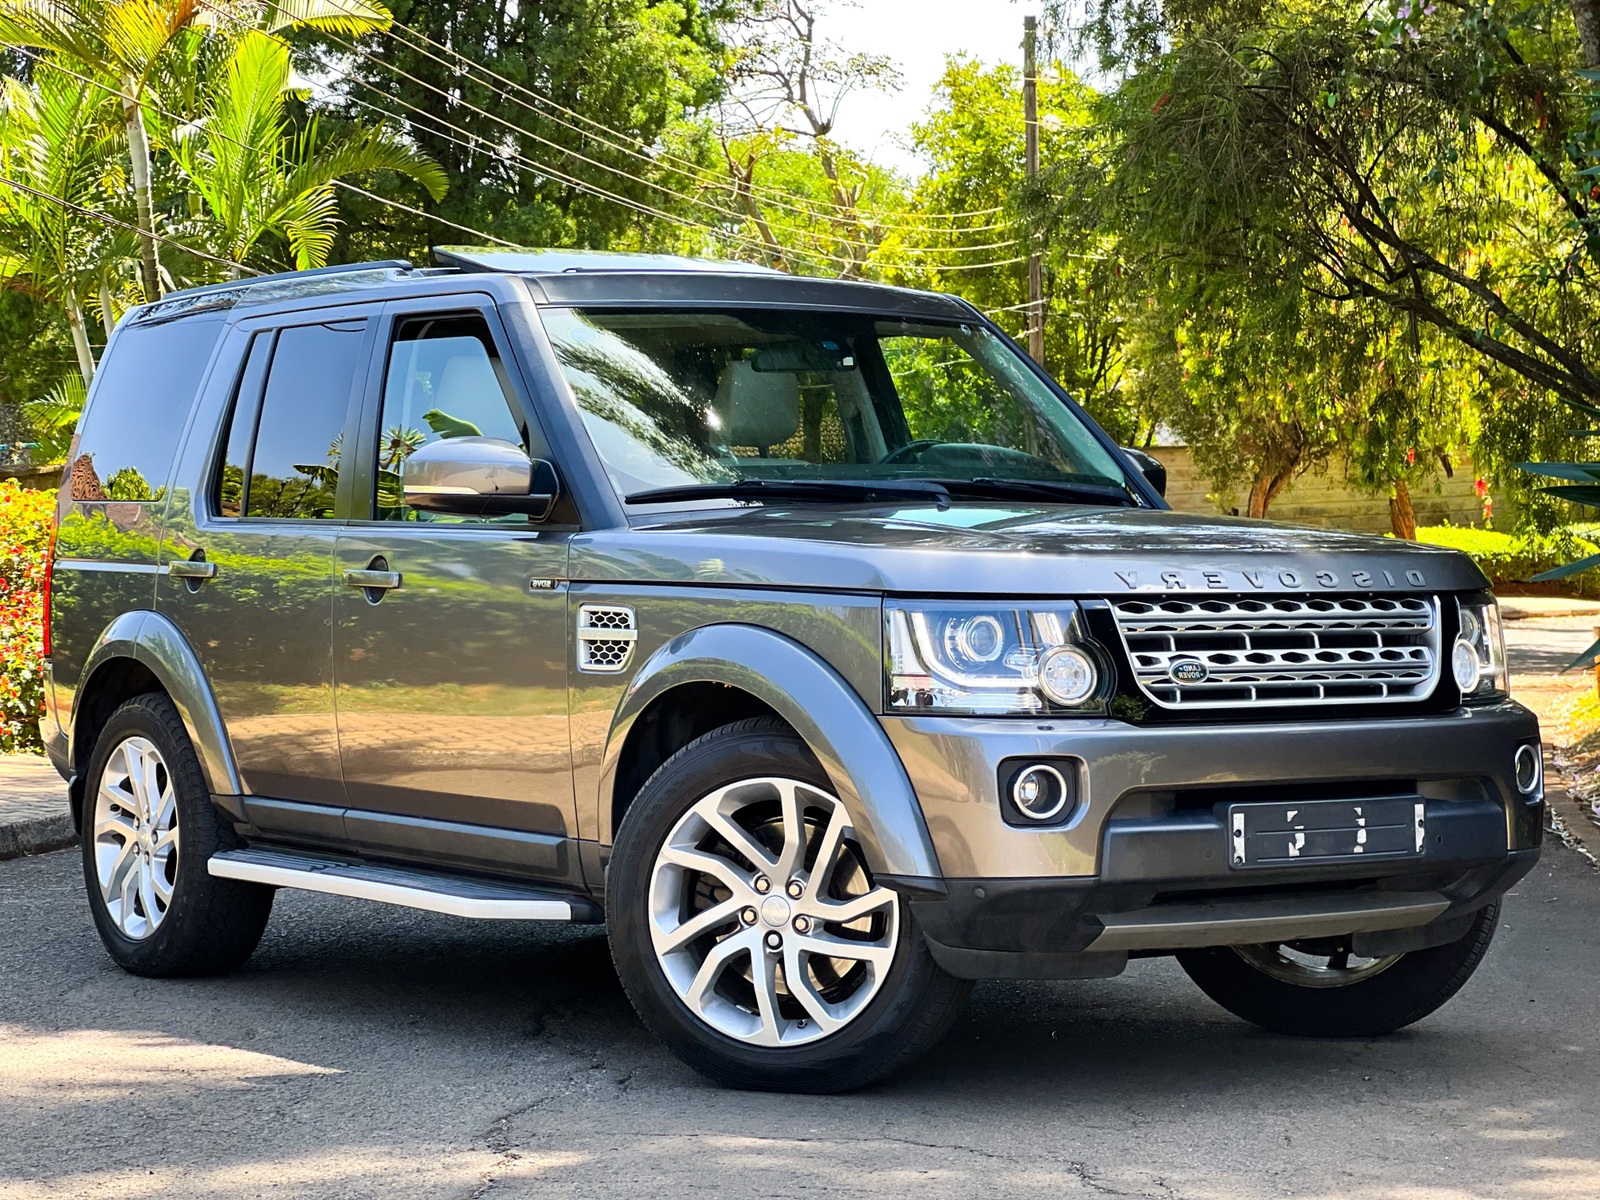 2015-land-rover-Discovery IV-1129